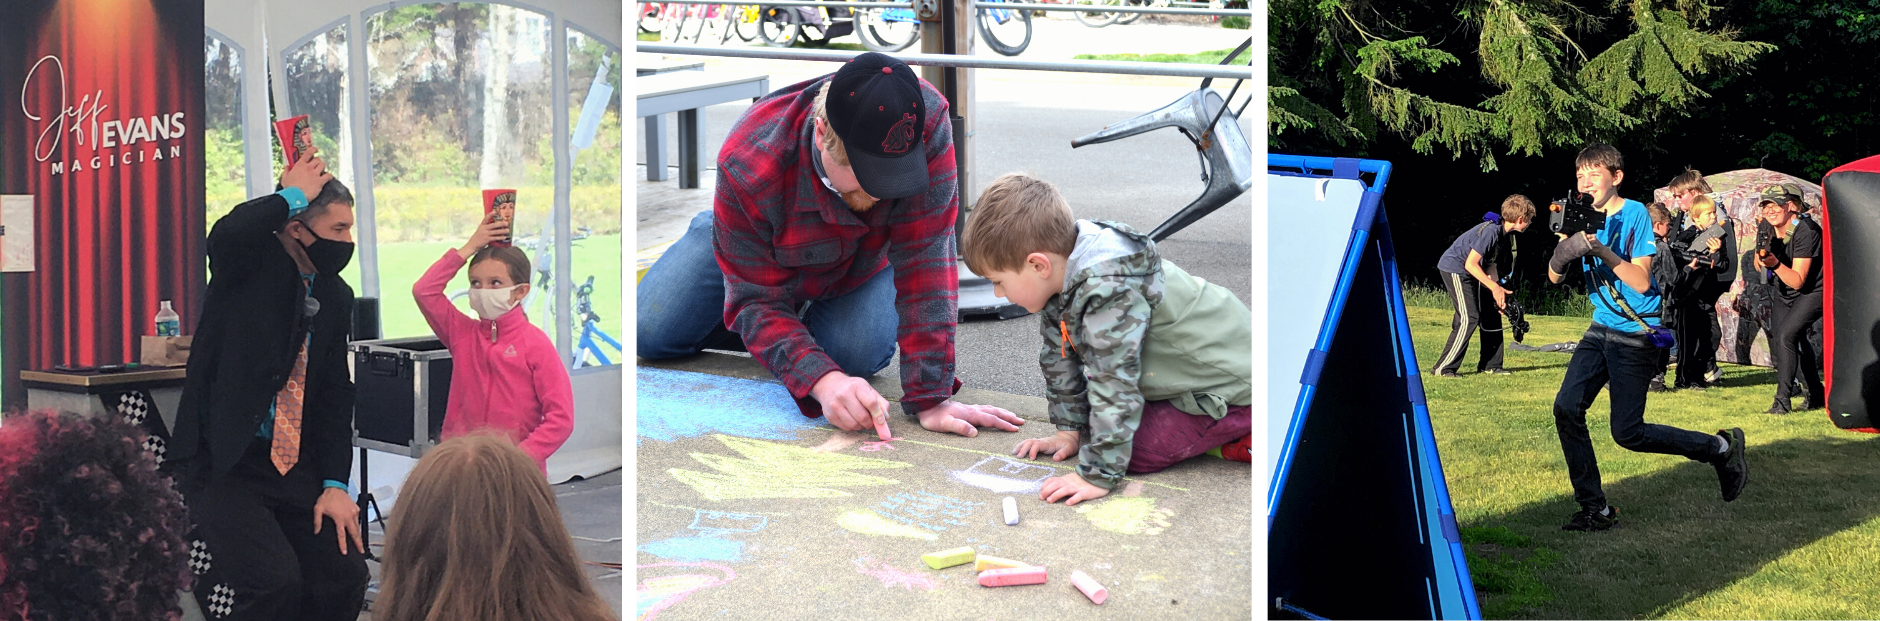 Enjoy a magic show, creating sidewalk art, laser tag games and so much more during SpringFest in Seabrook!